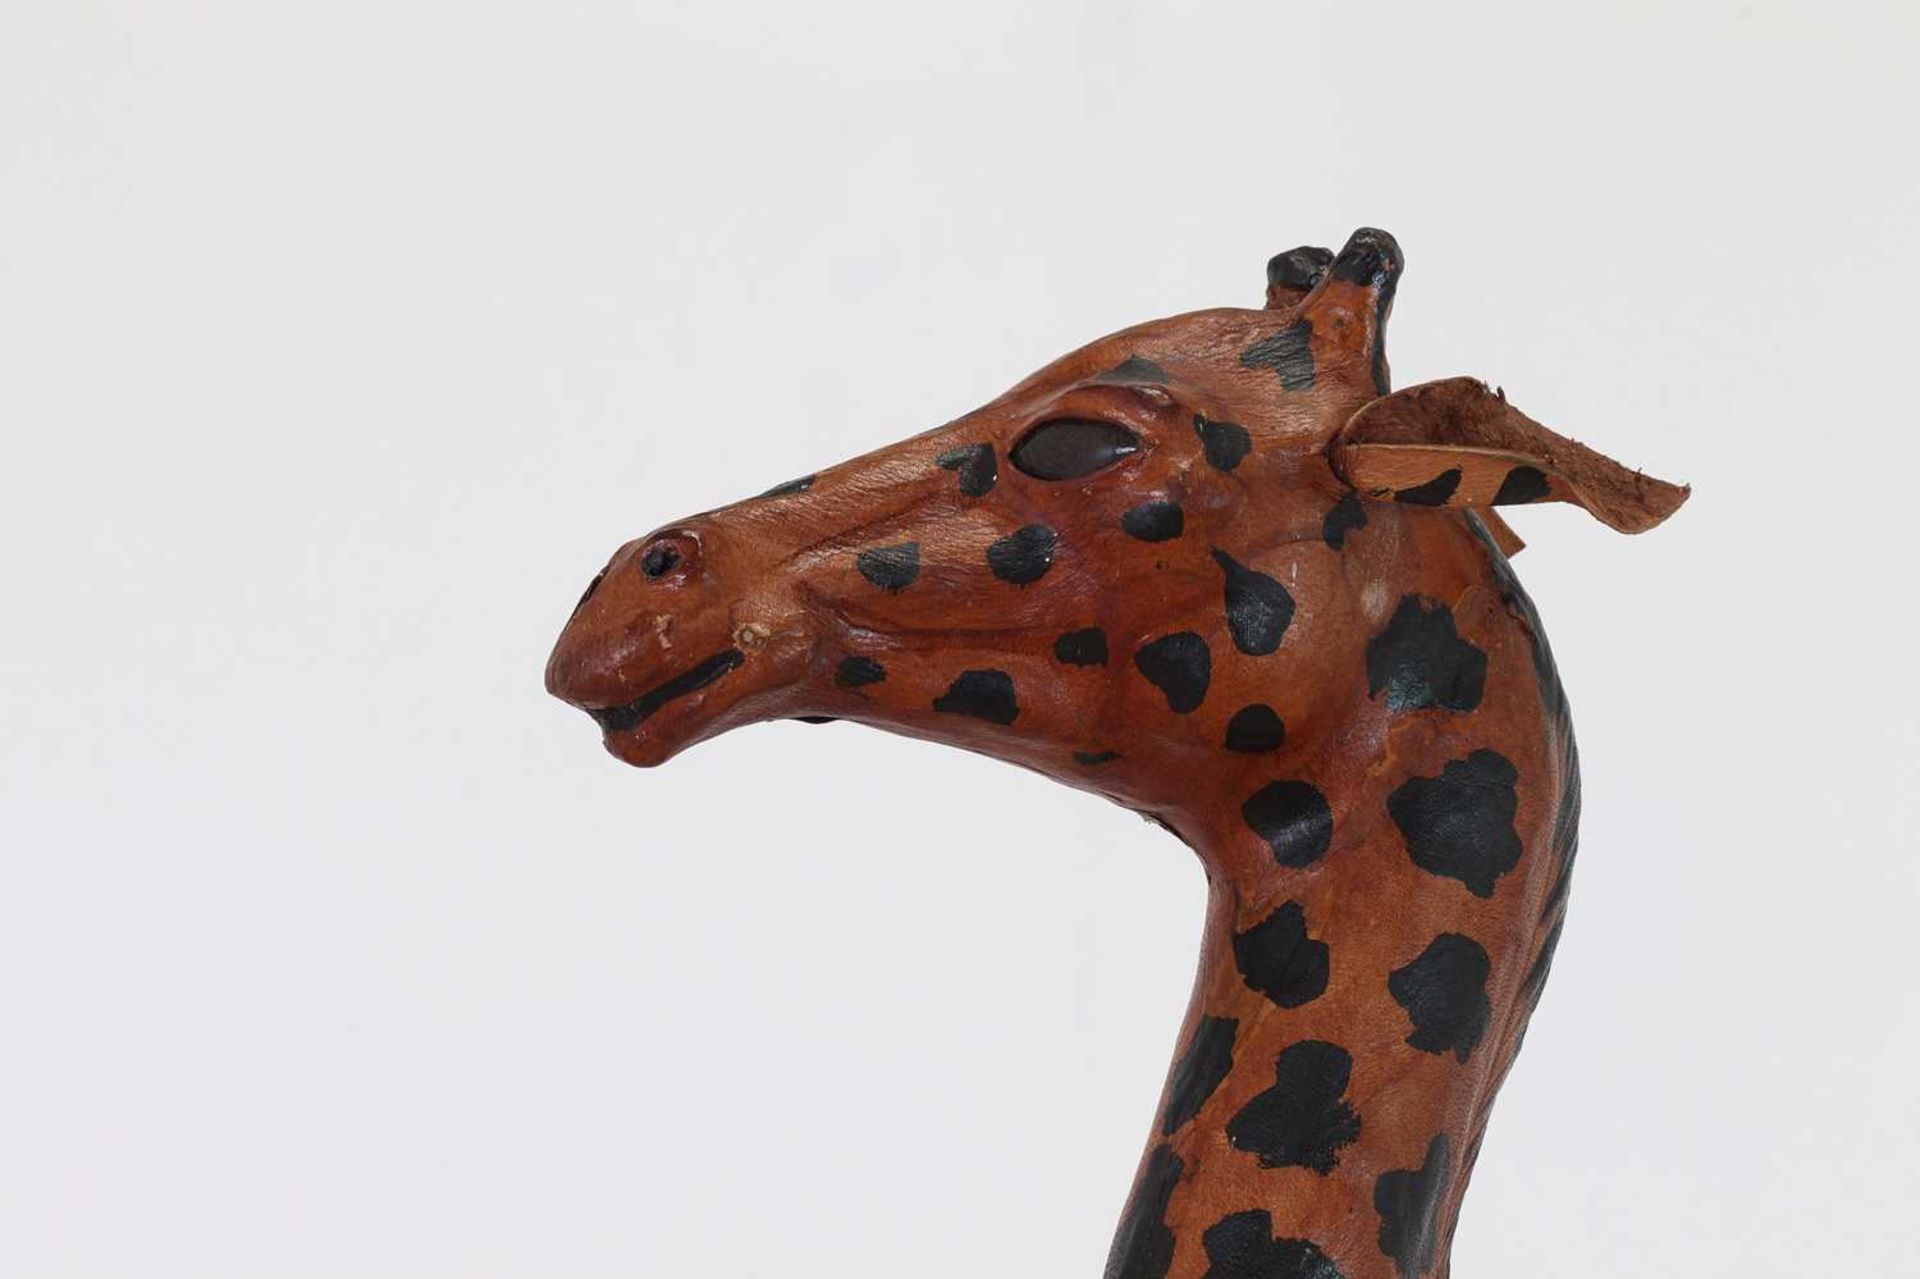 A pair of painted hide figures of giraffes, - Image 7 of 30